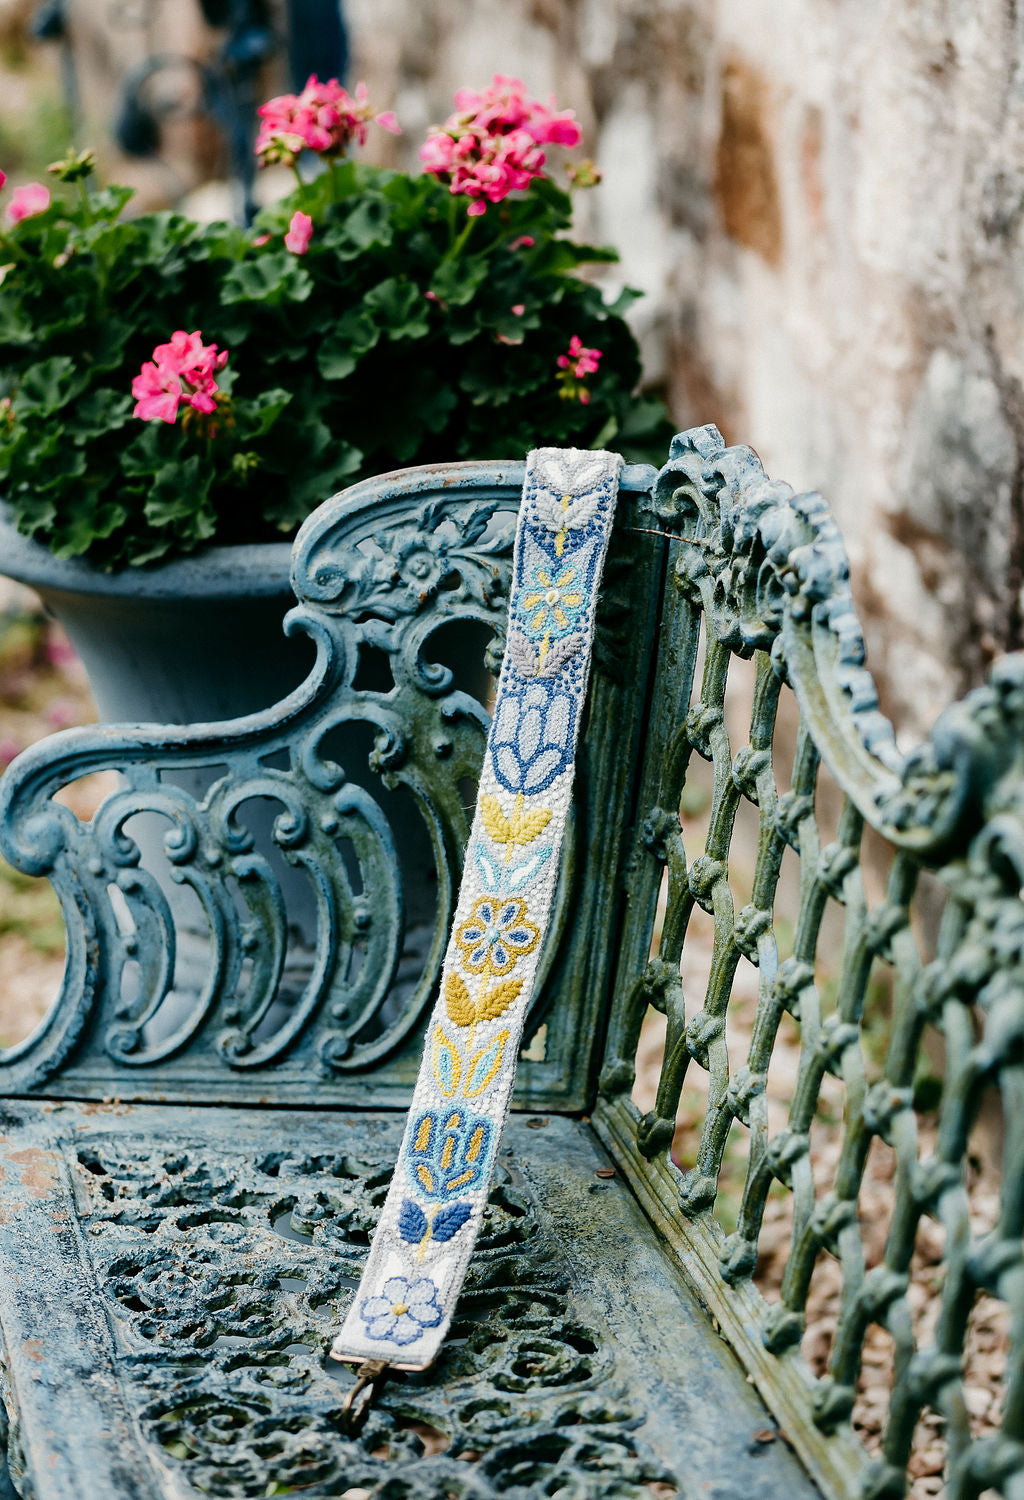 A purse strap with a floral and leaves design in yellow, purple, and grey displayed on a bench